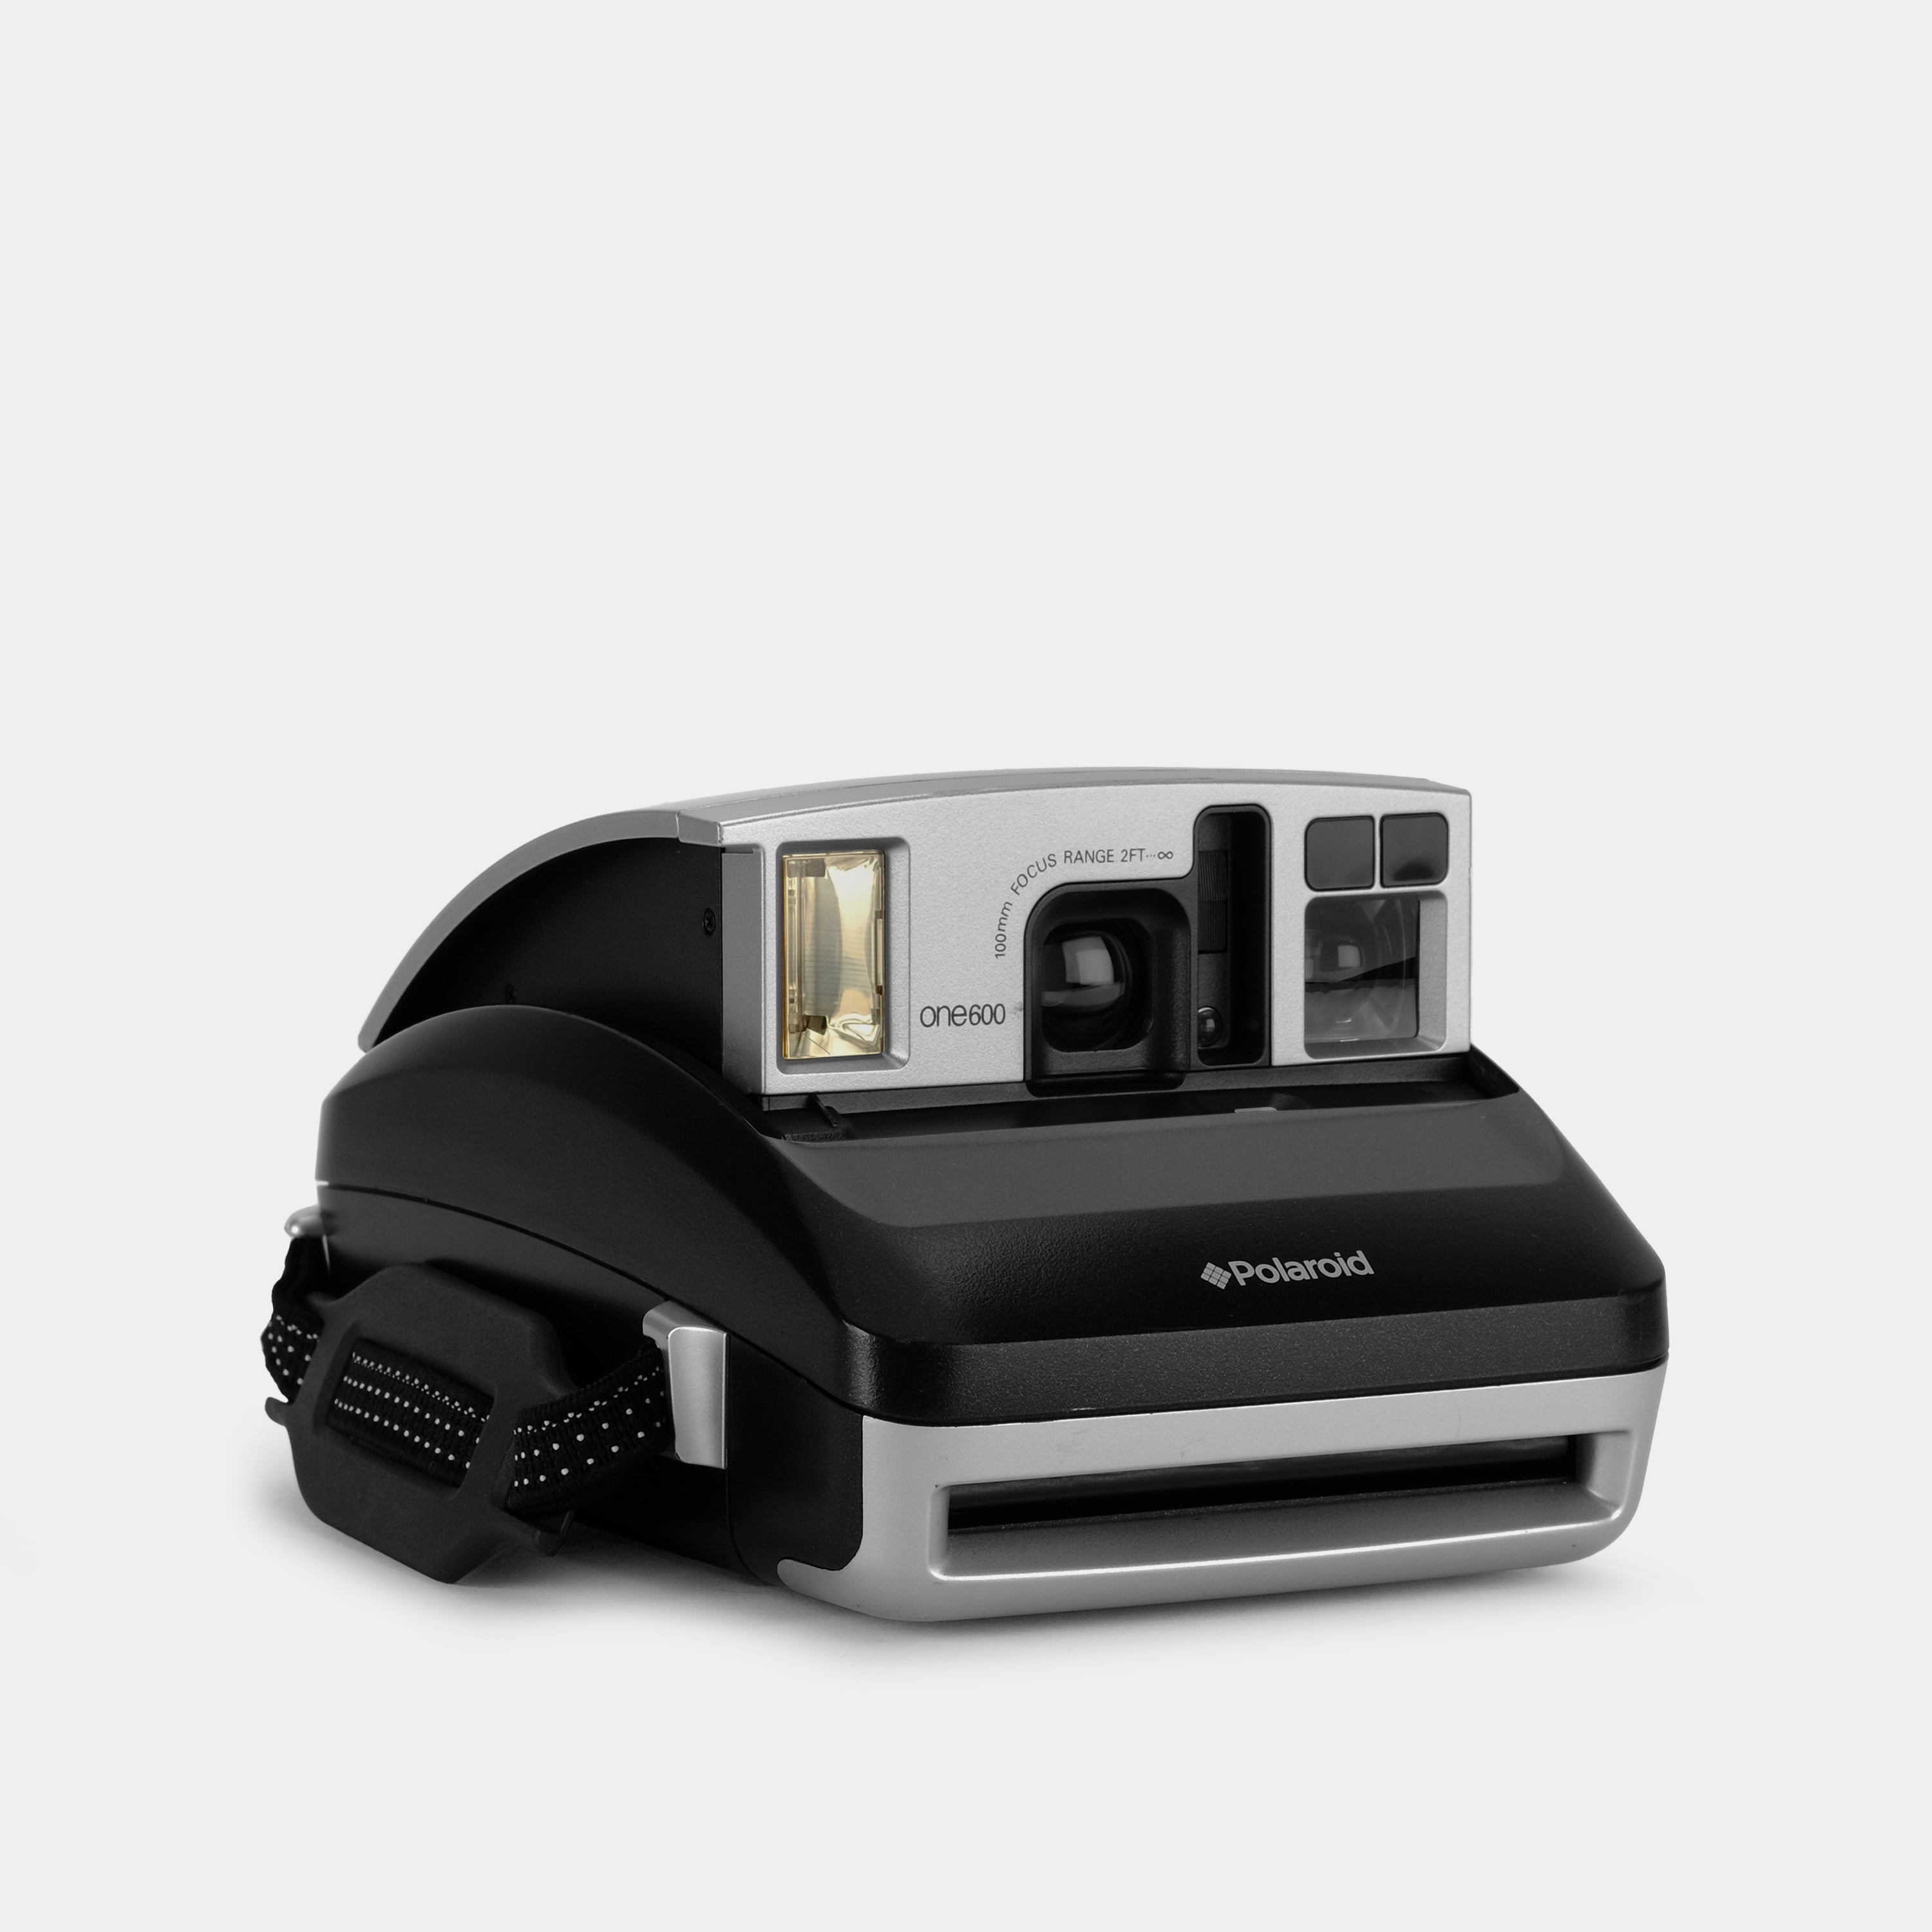 Polaroid 600 One600 Business Black and Silver Instant Film Camera